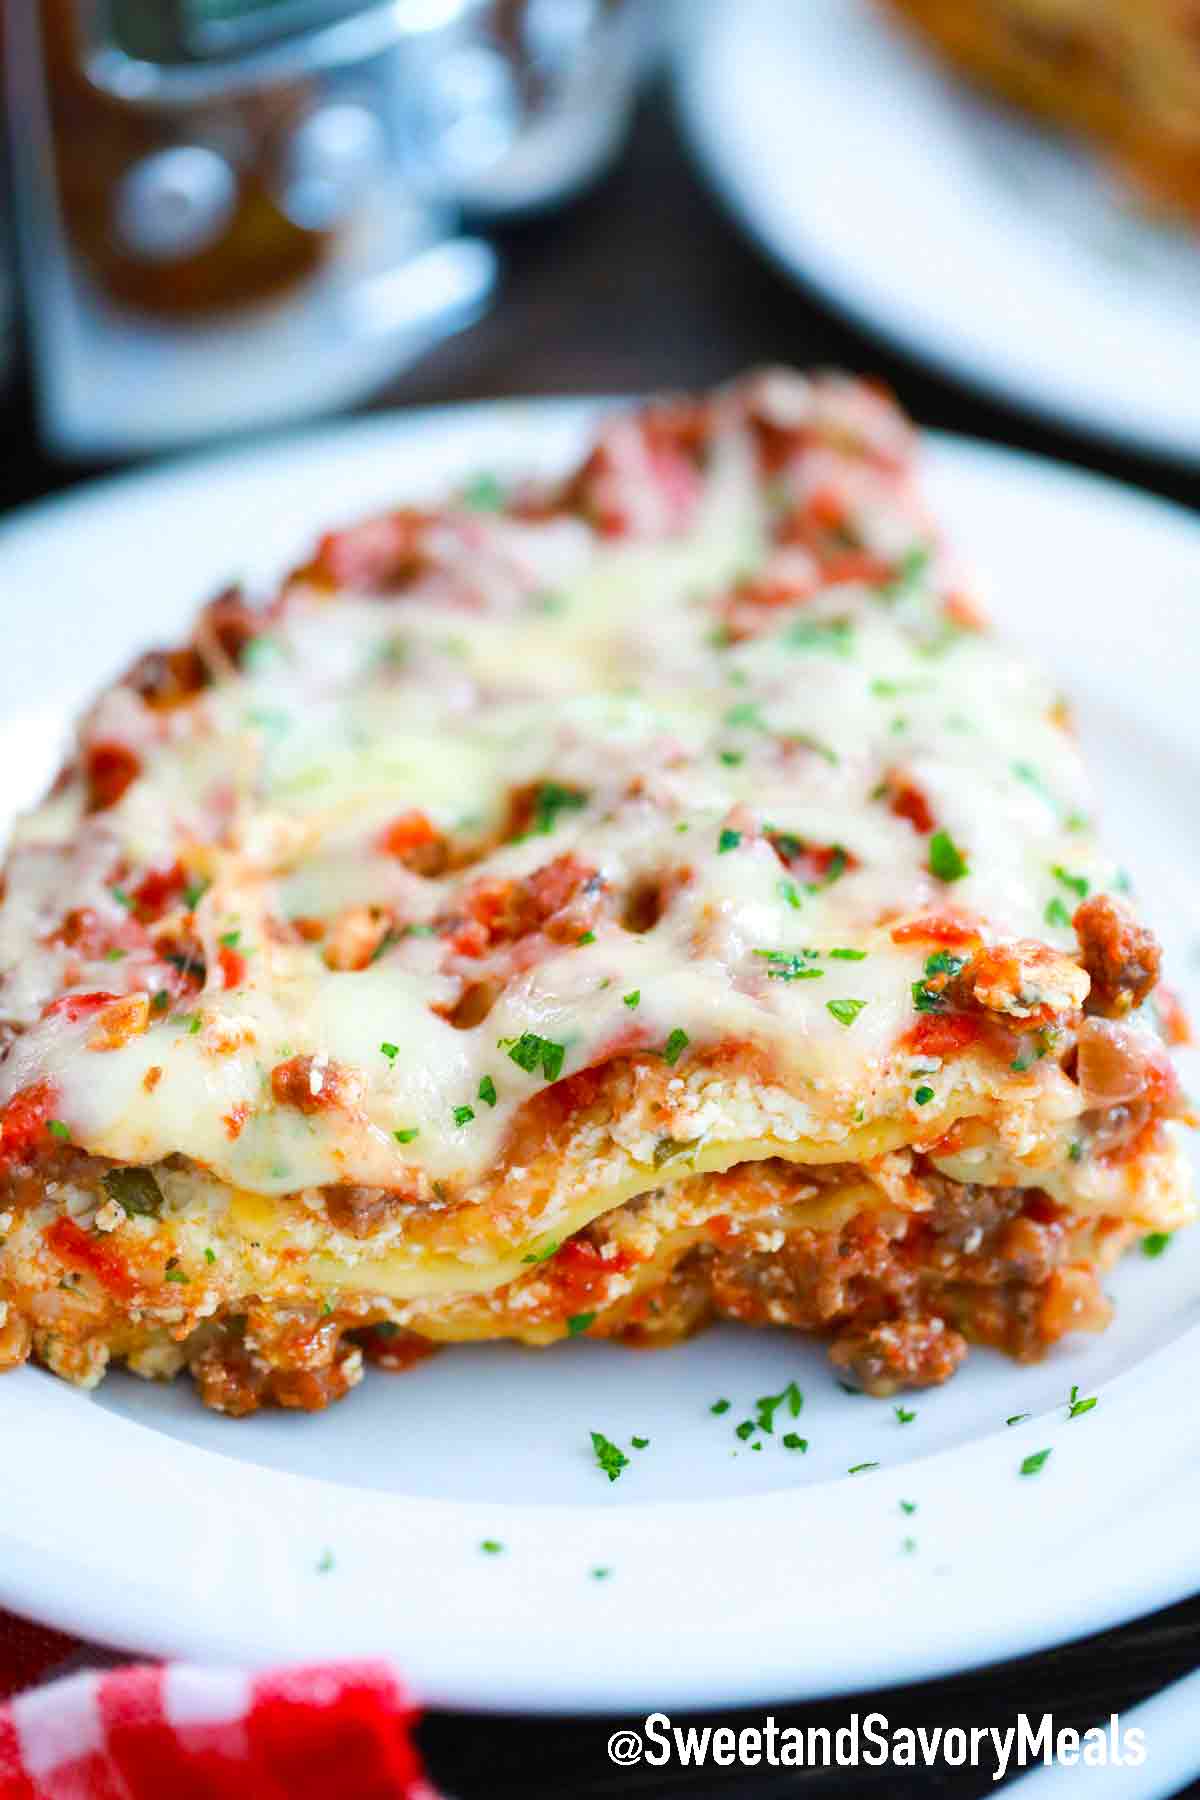 Slow Cooker Lasagna - Sweet and Savory Meals